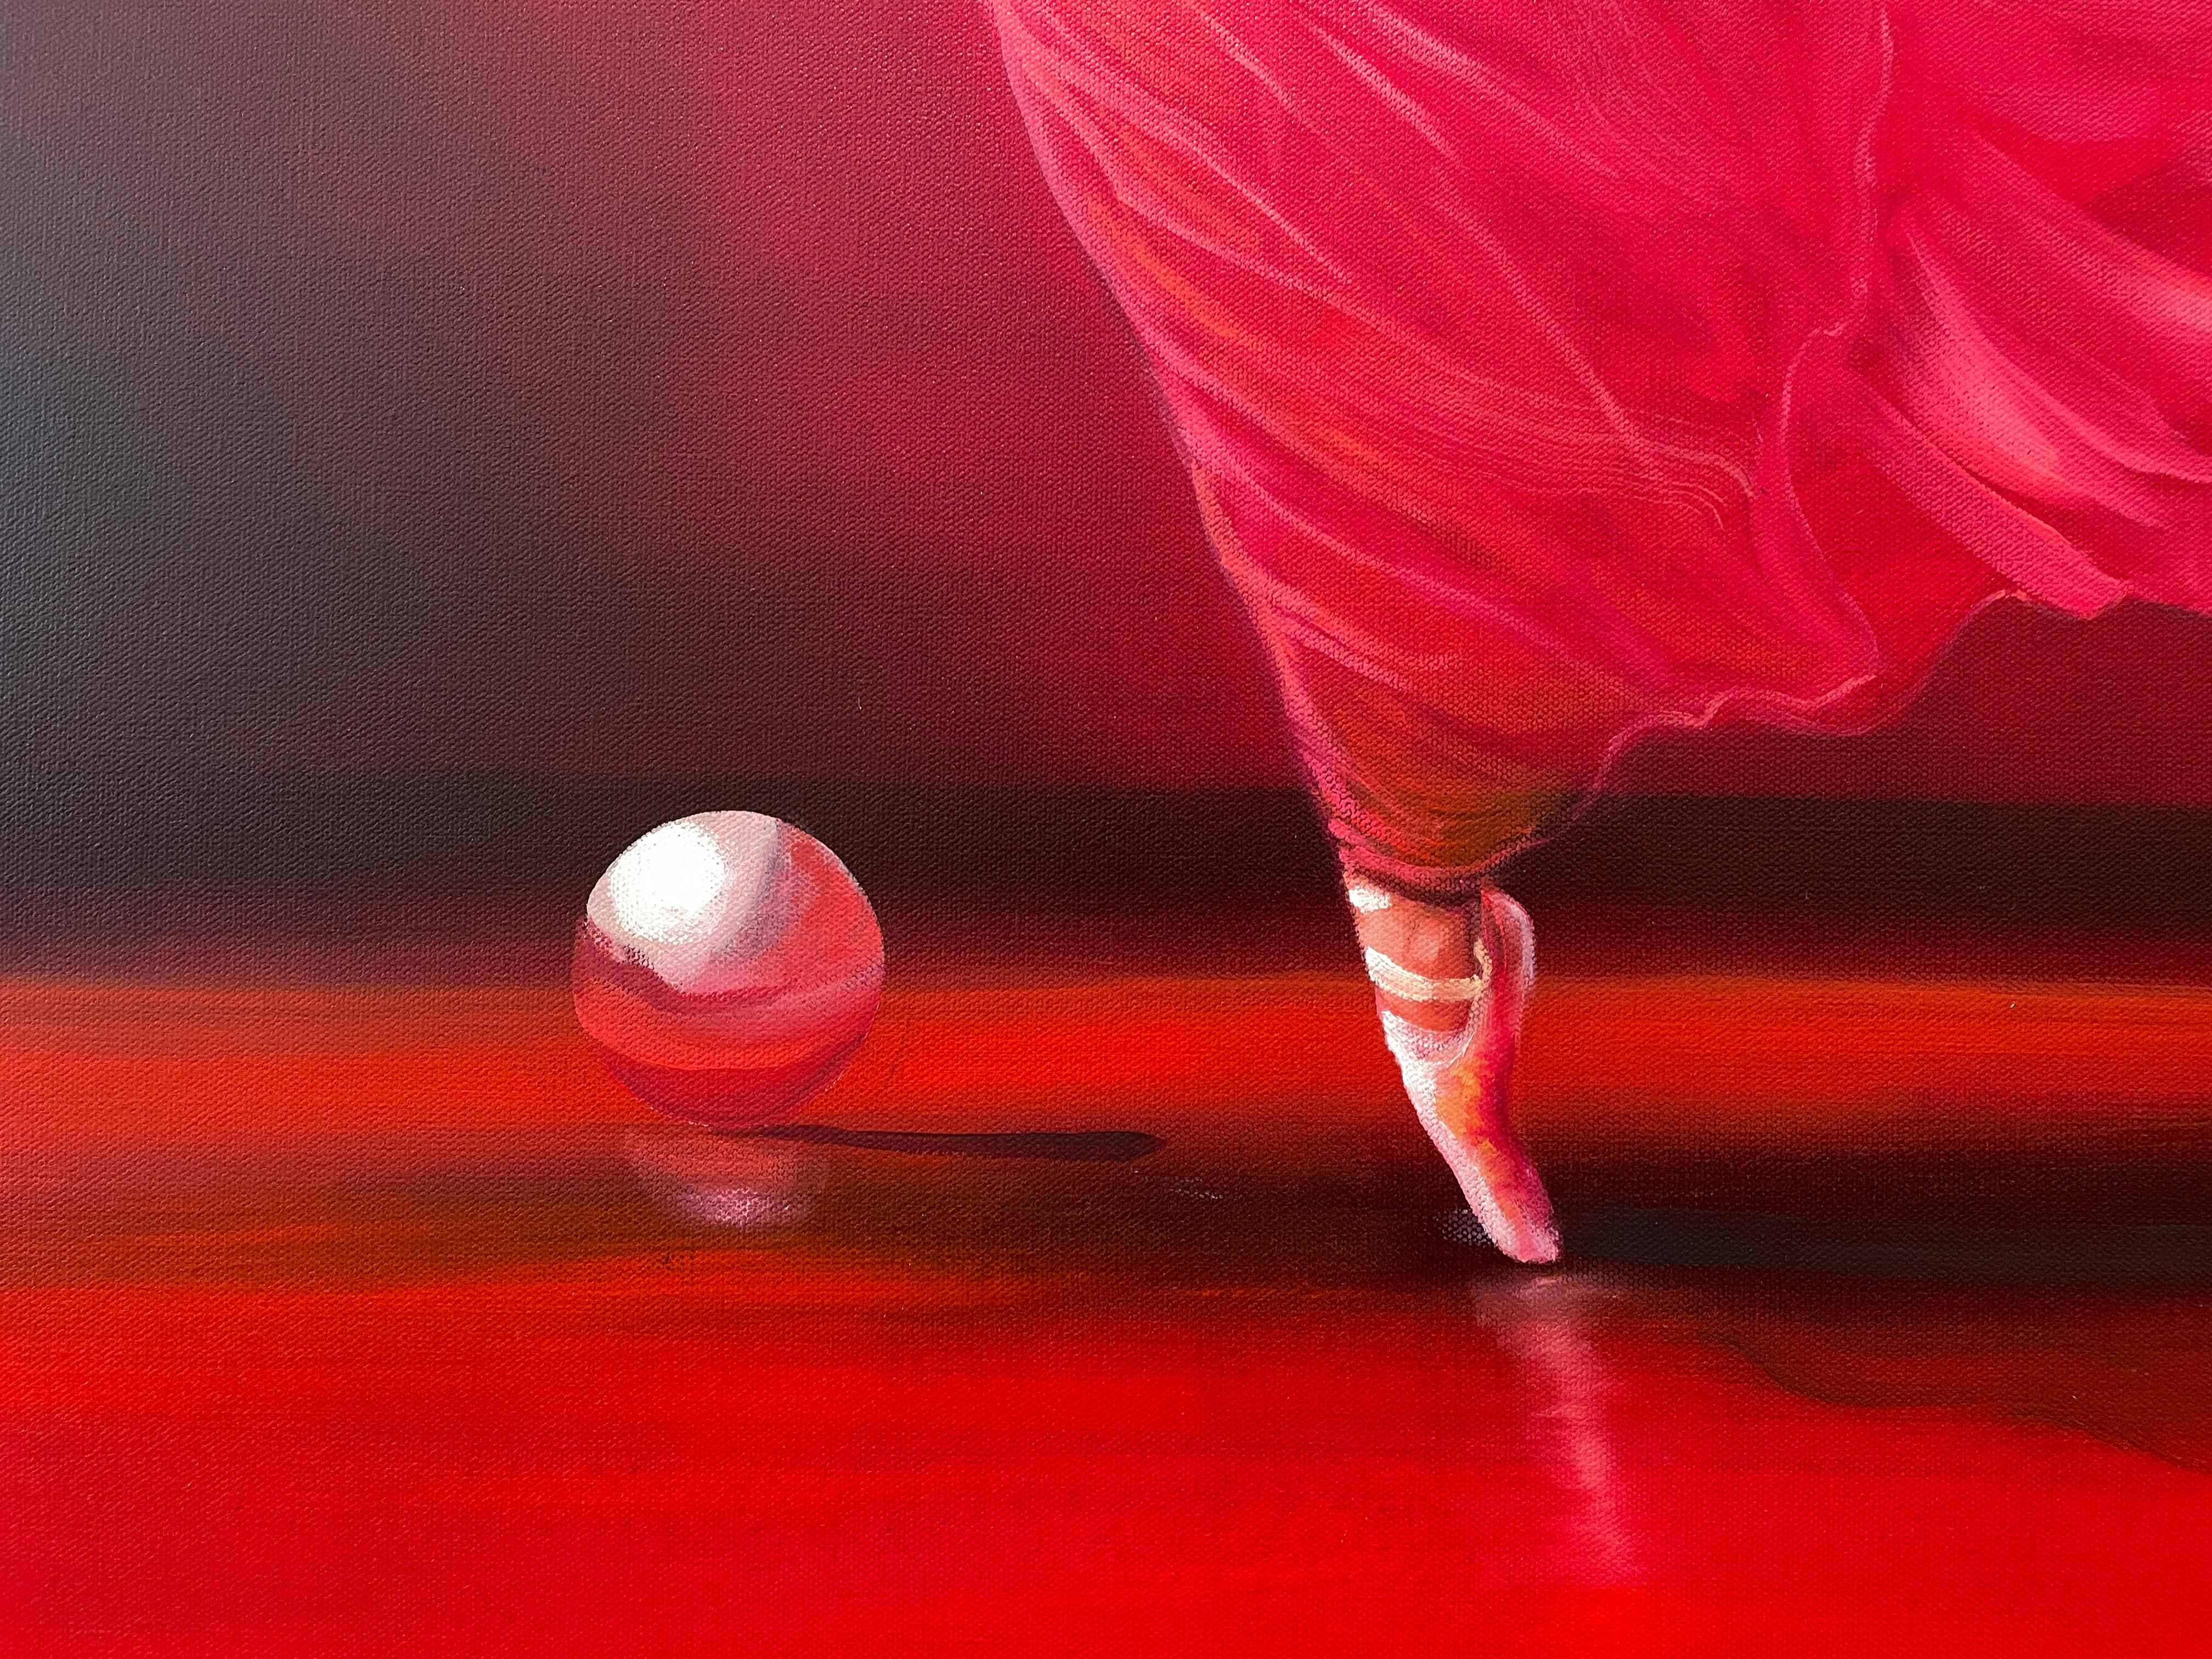 'Passione' - Ballerina in Red - The Ballet Series - Figurative Oil Painting For Sale 4